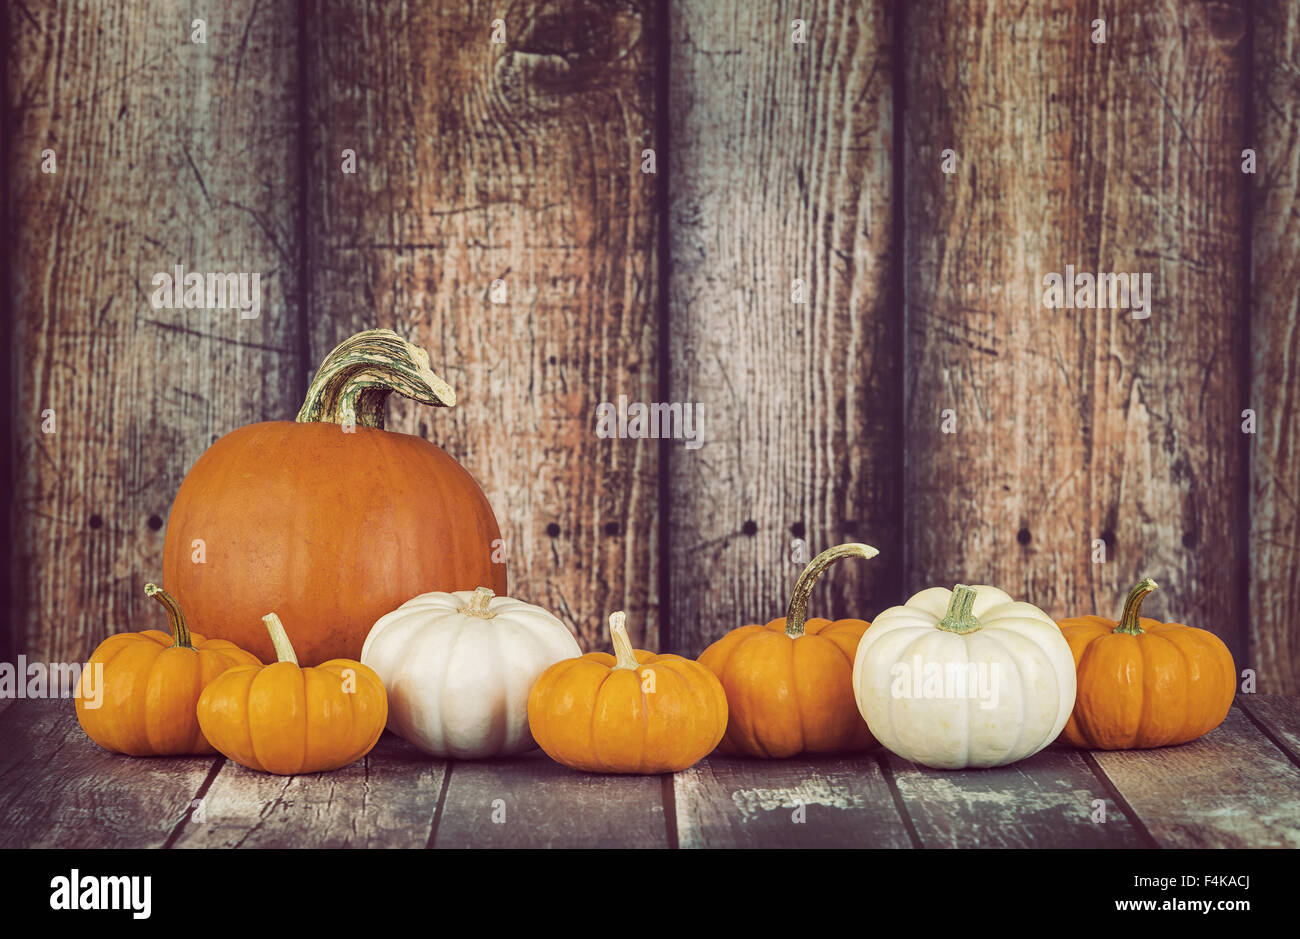 Pie pumpkin and mini pumpkins in a row against rustic wooden background Stock Photo